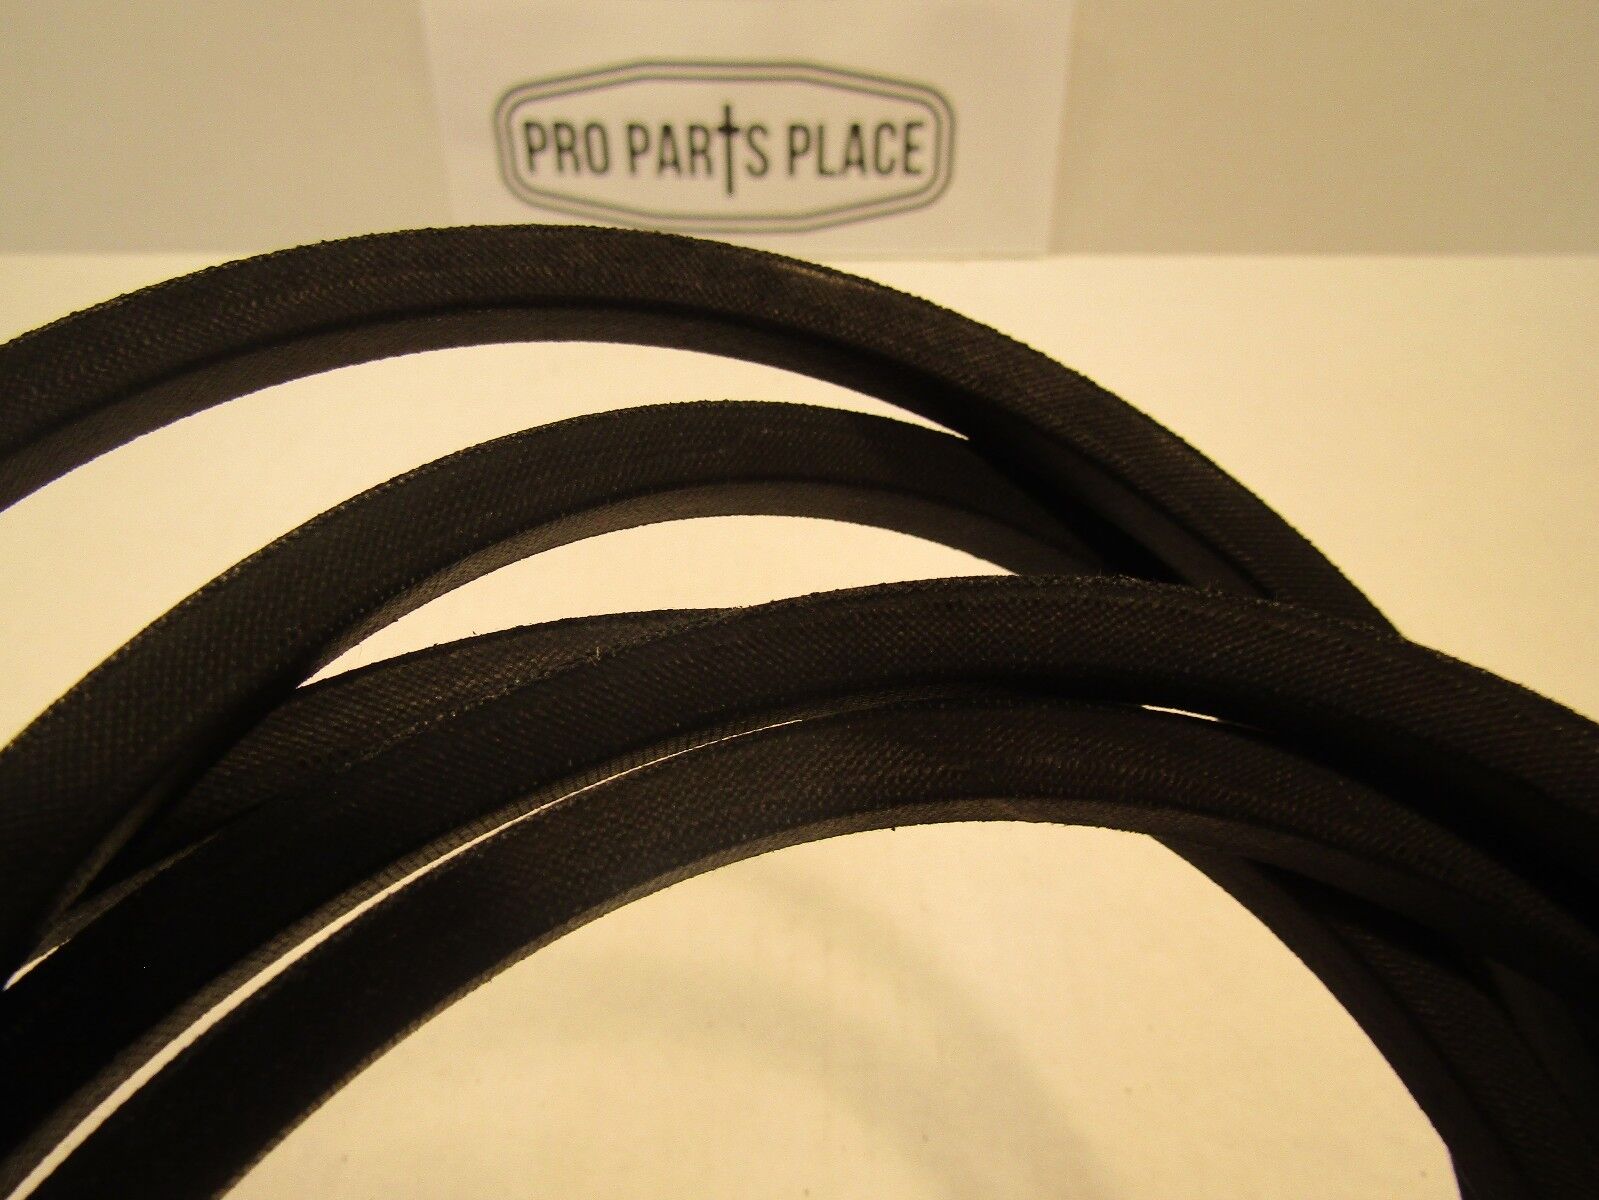 1/2" x 61" PUMP DRIVE REPLACEMENT BELT FOR SCAG 481461 48760 TURF TIGER 52" 61"